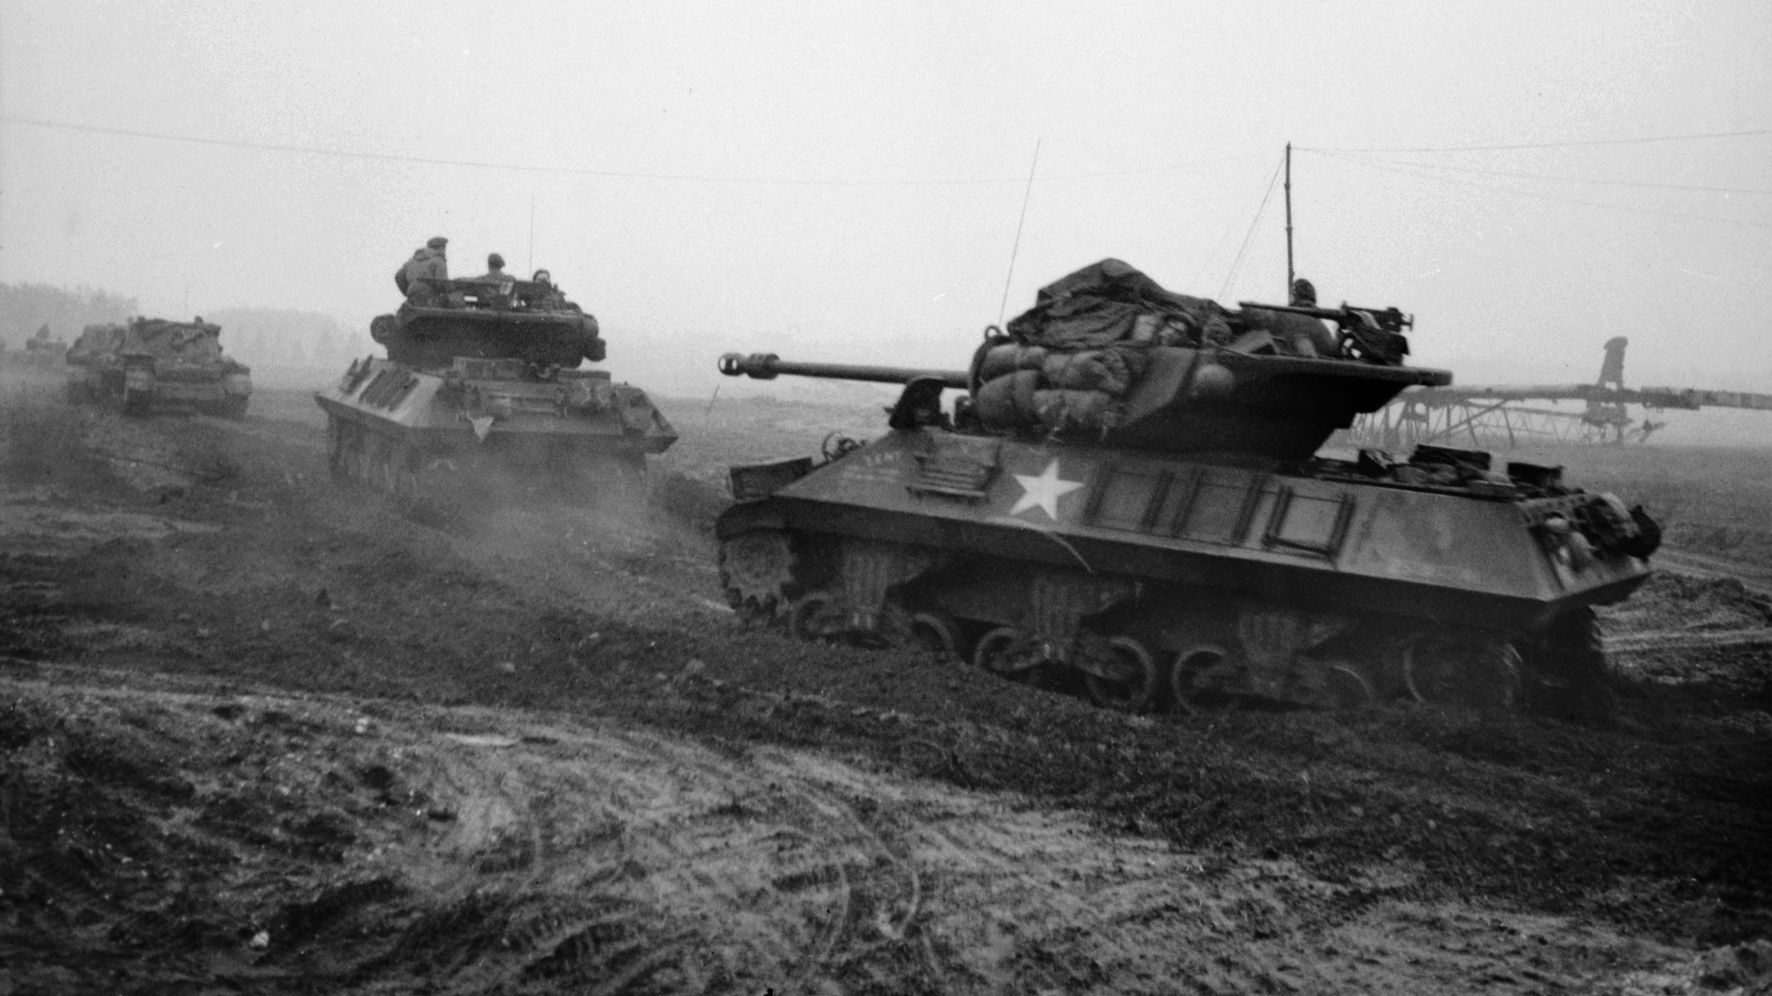 During the opening hours of Operation Veritable, Achilles tank destroyers of the 15th Scottish Division advance toward the Reichswald on February 8, 1945. The main armament of the Achilles was a 17-pounder gun mounted in an open turret.